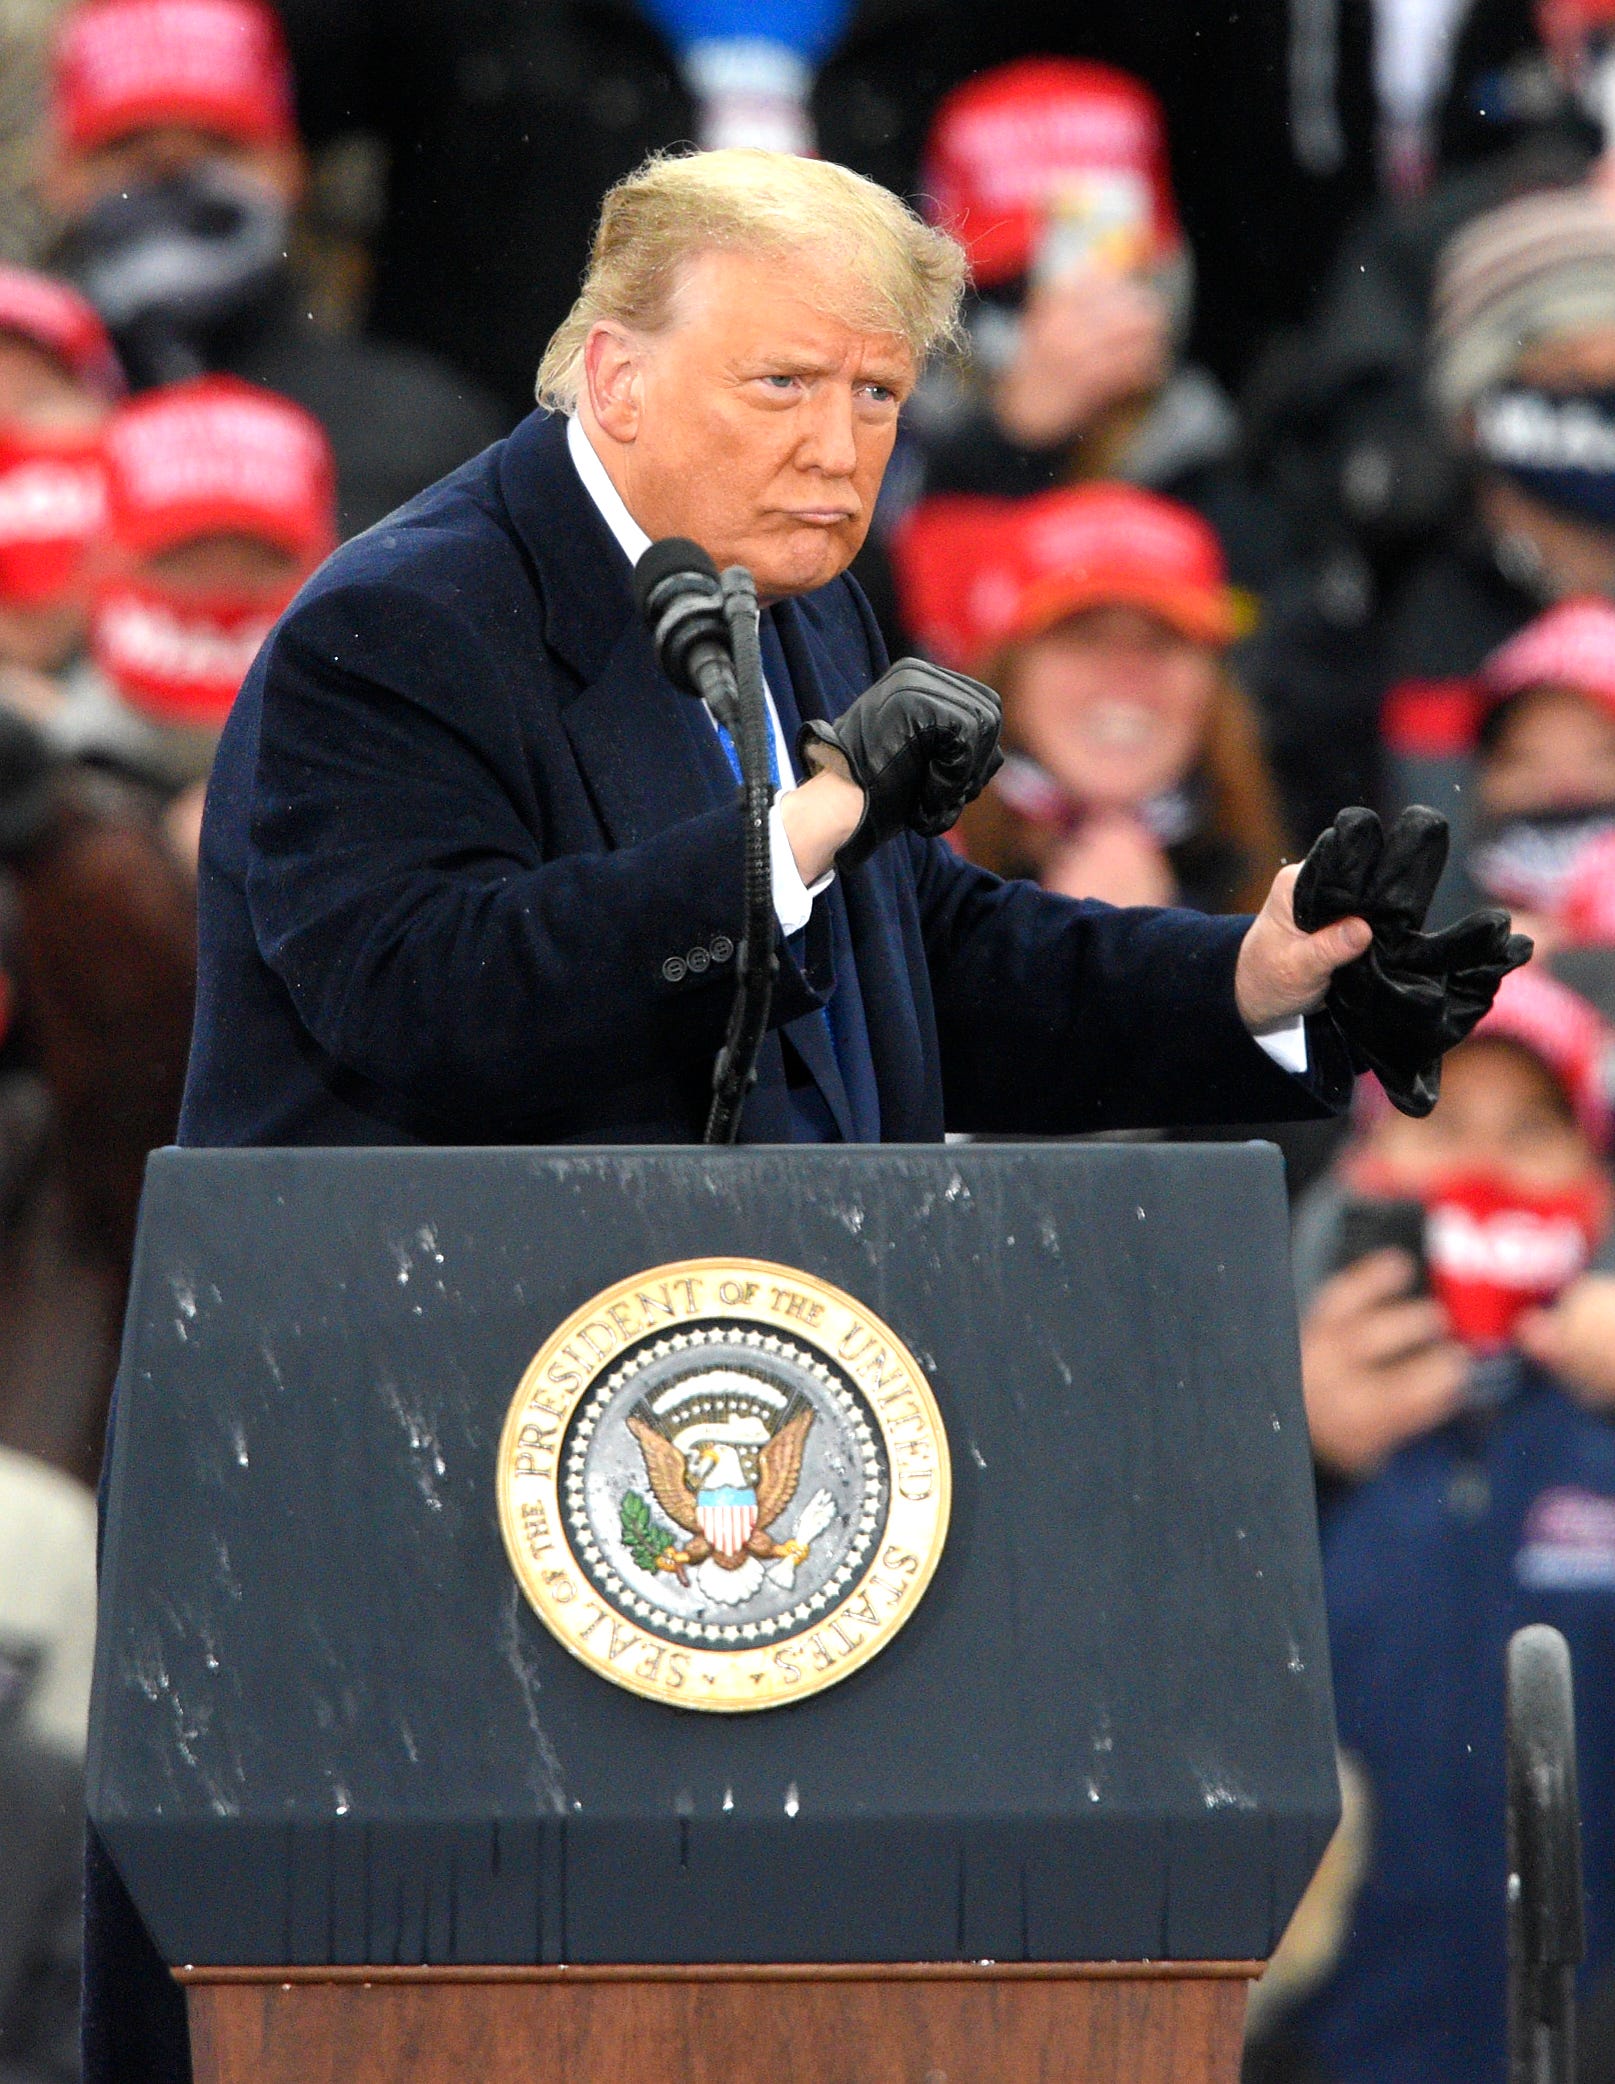 President Donald Trump punches his fists back and forth after his campaign rally speech in Lansing Tuesday, one week before election day. Trump likely needs to win Michigan to win a second term in office.